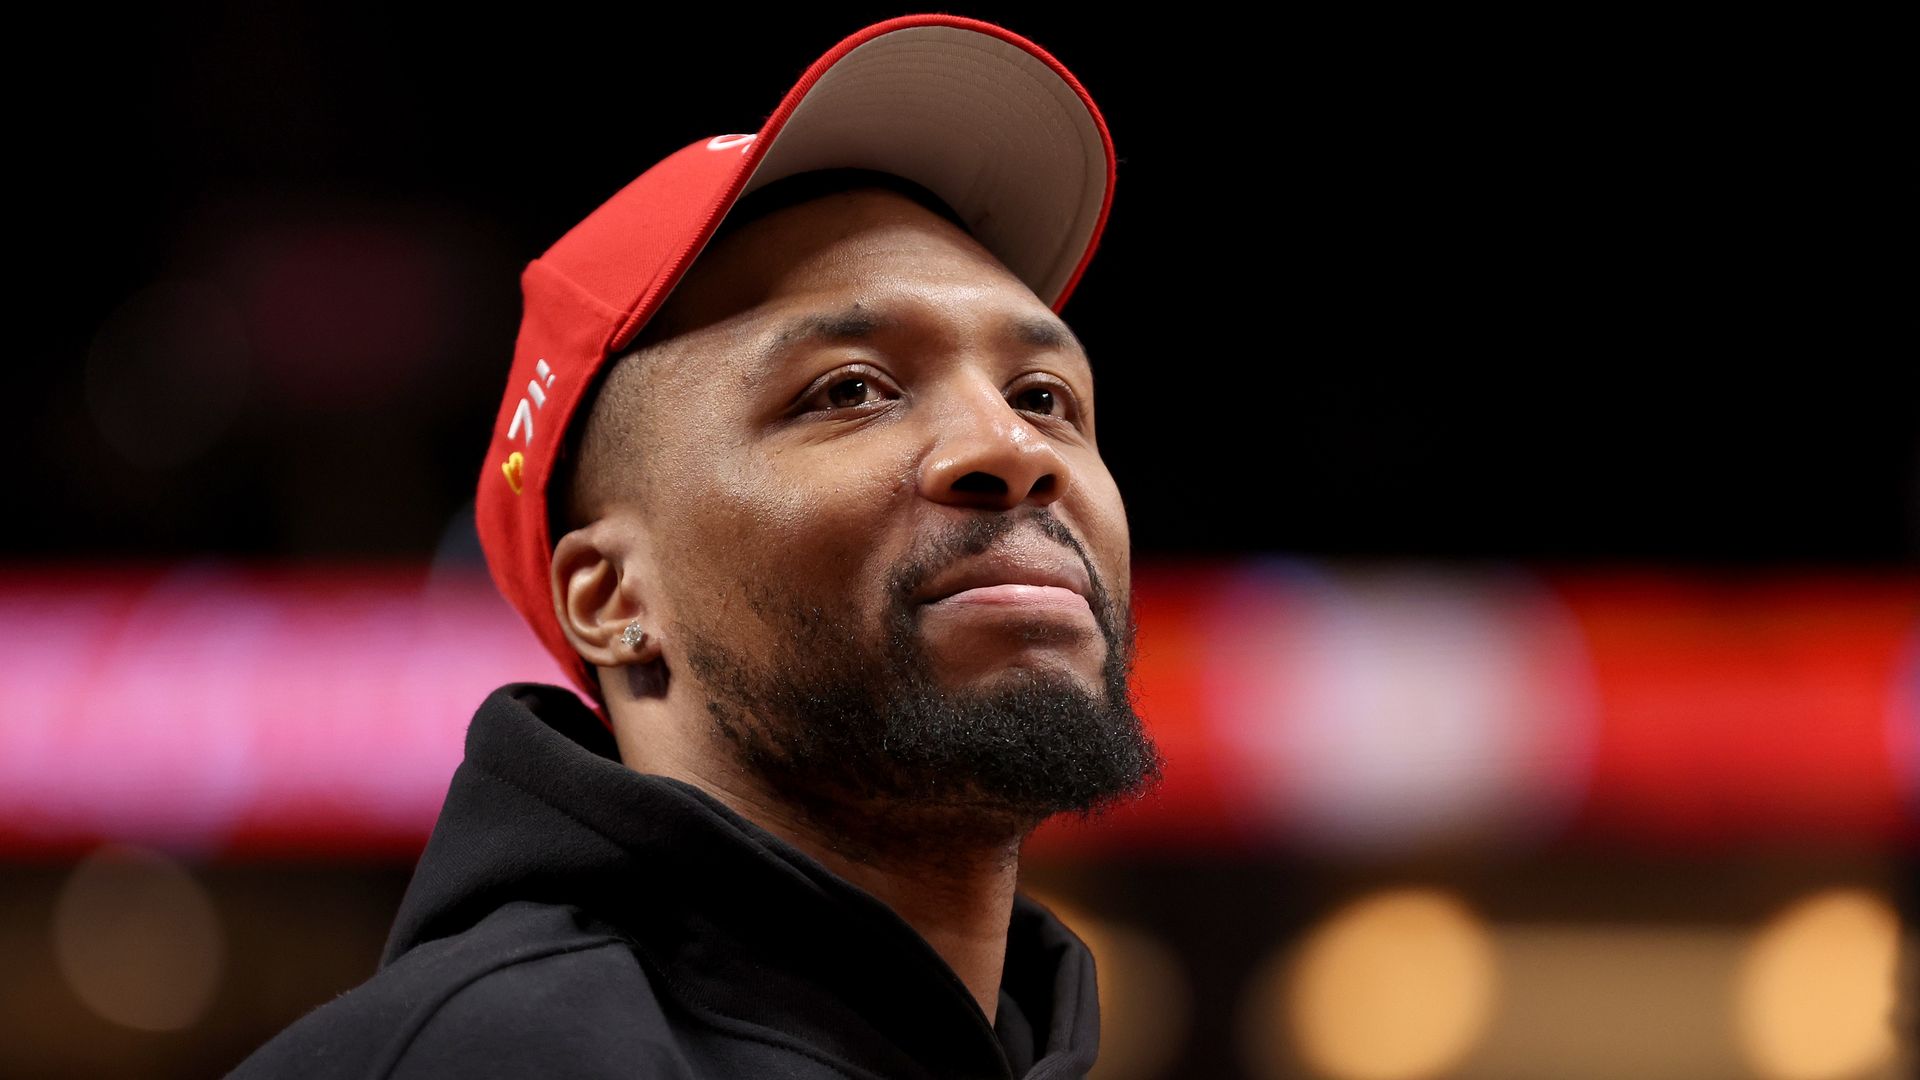 A basketball player in a red baseball cap looks into the distance.